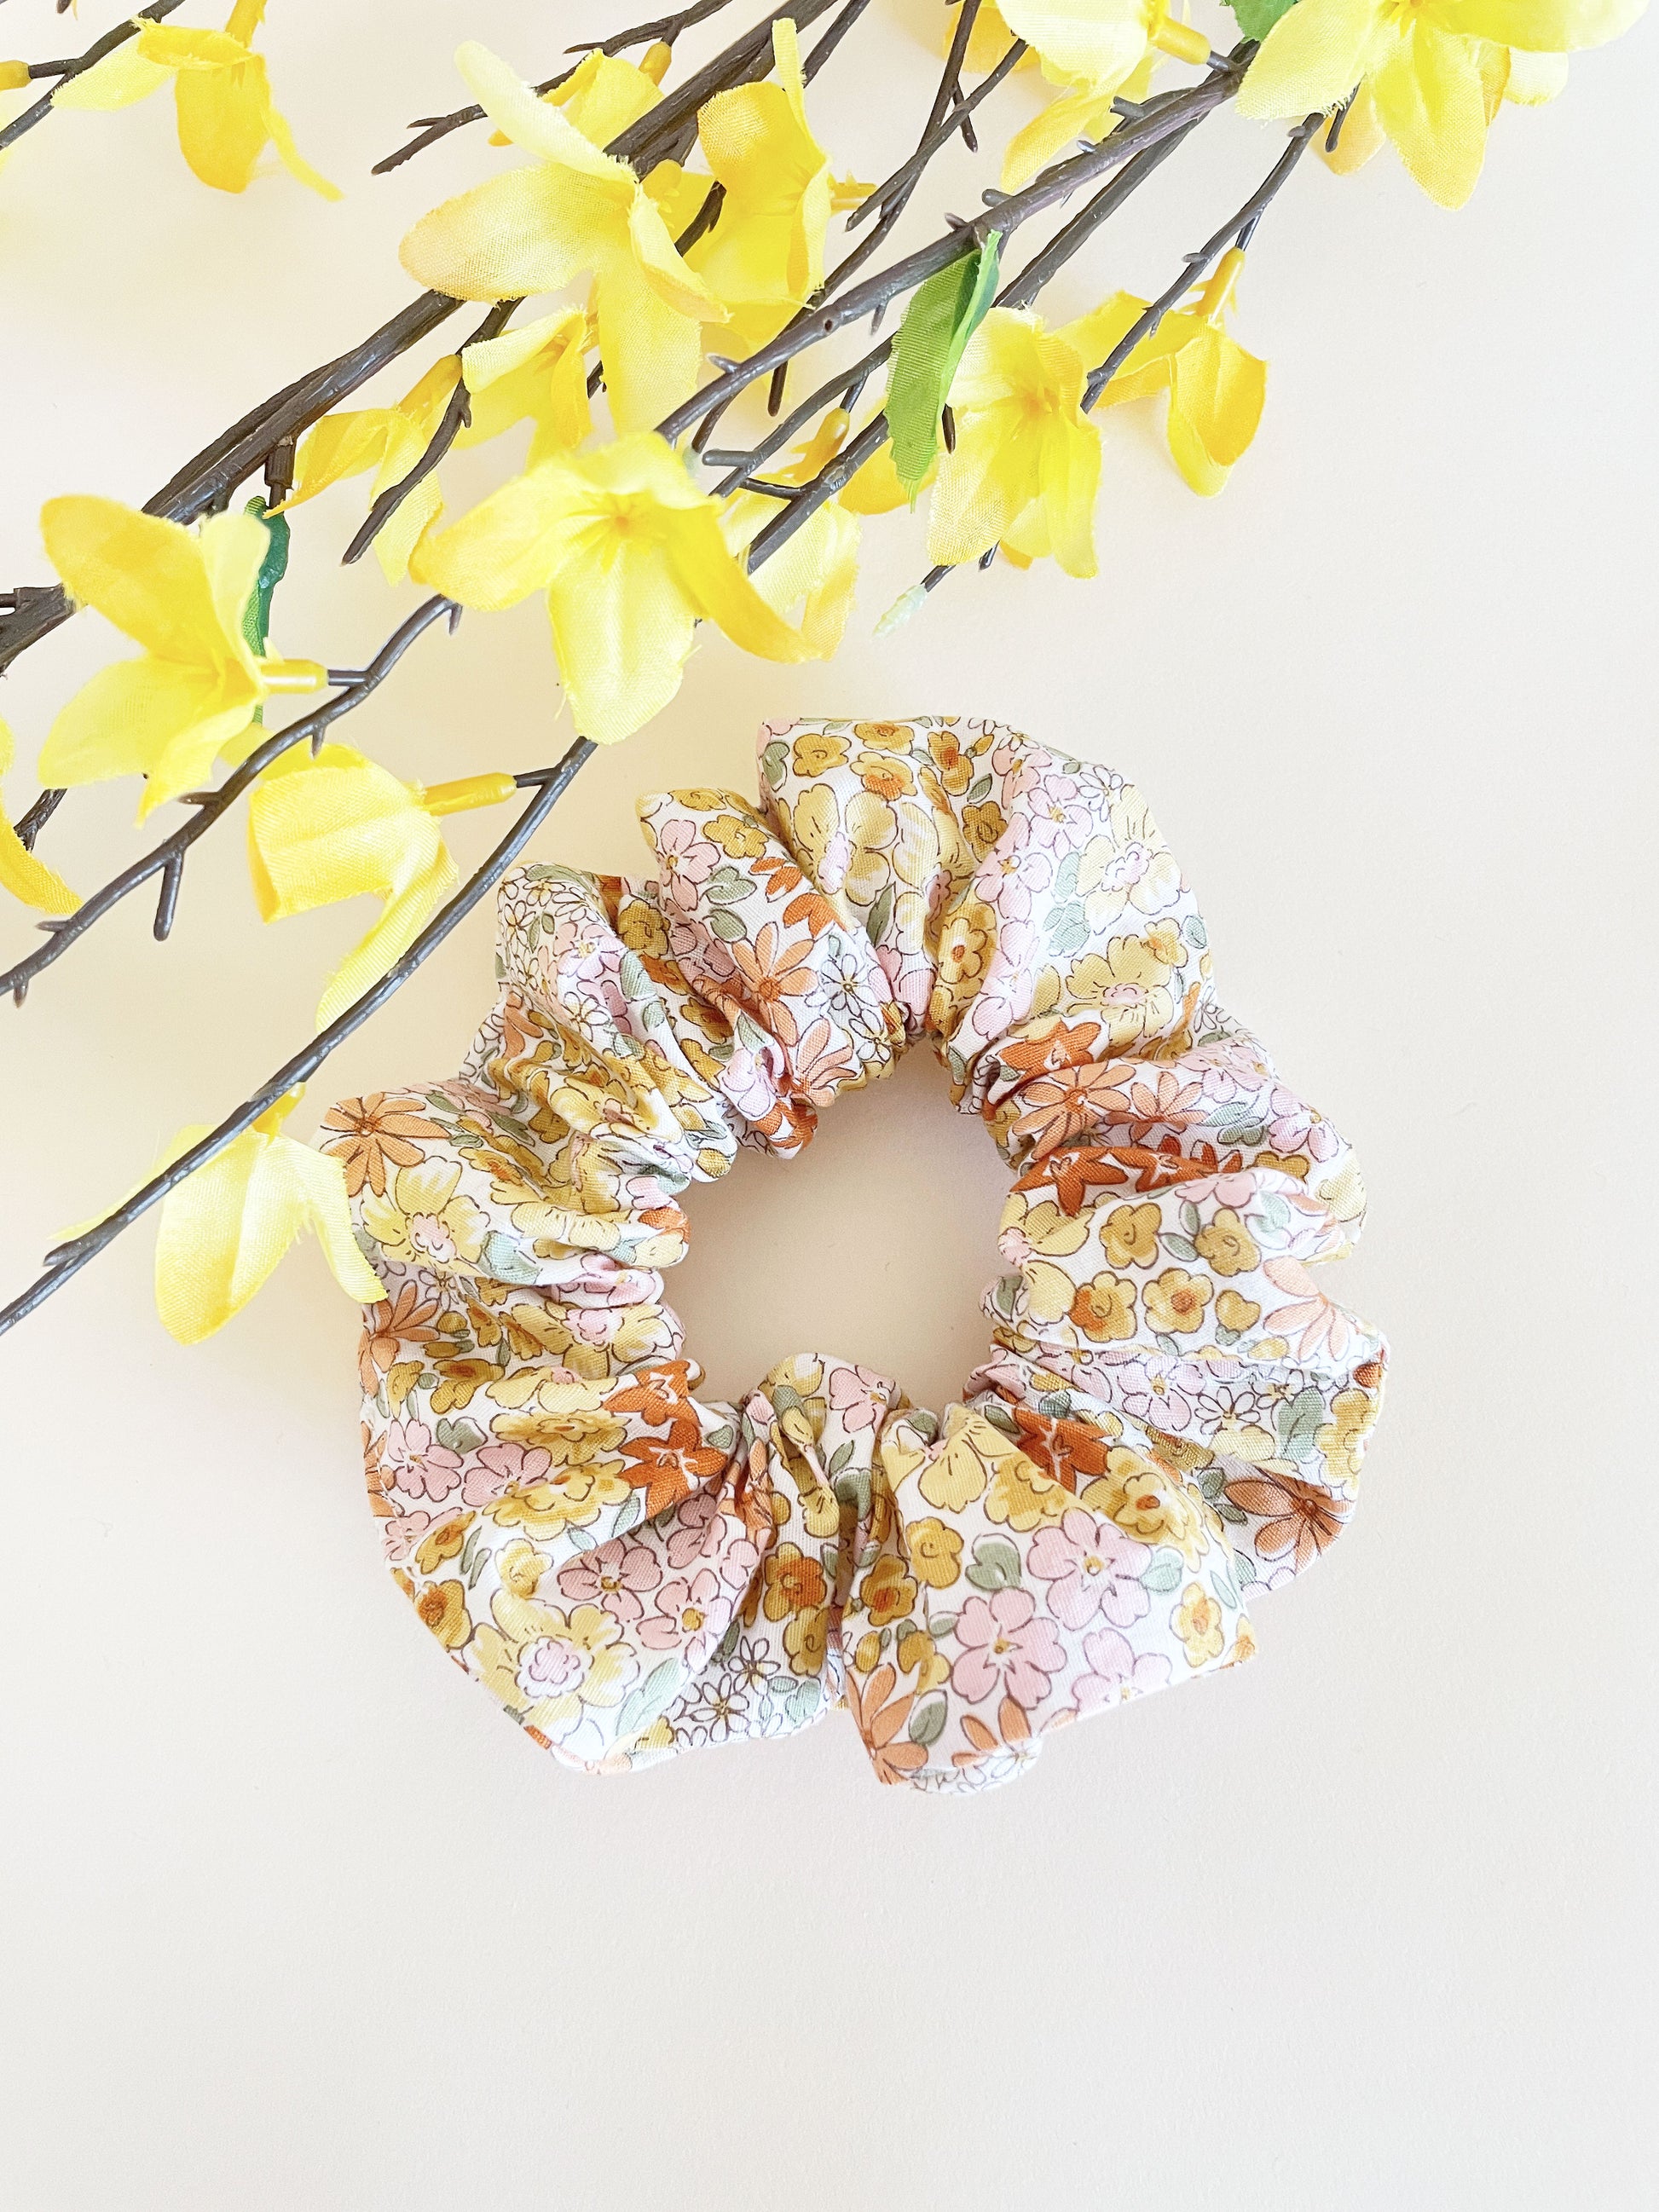 A handmade boho yellow floral scrunchie against an off white background.